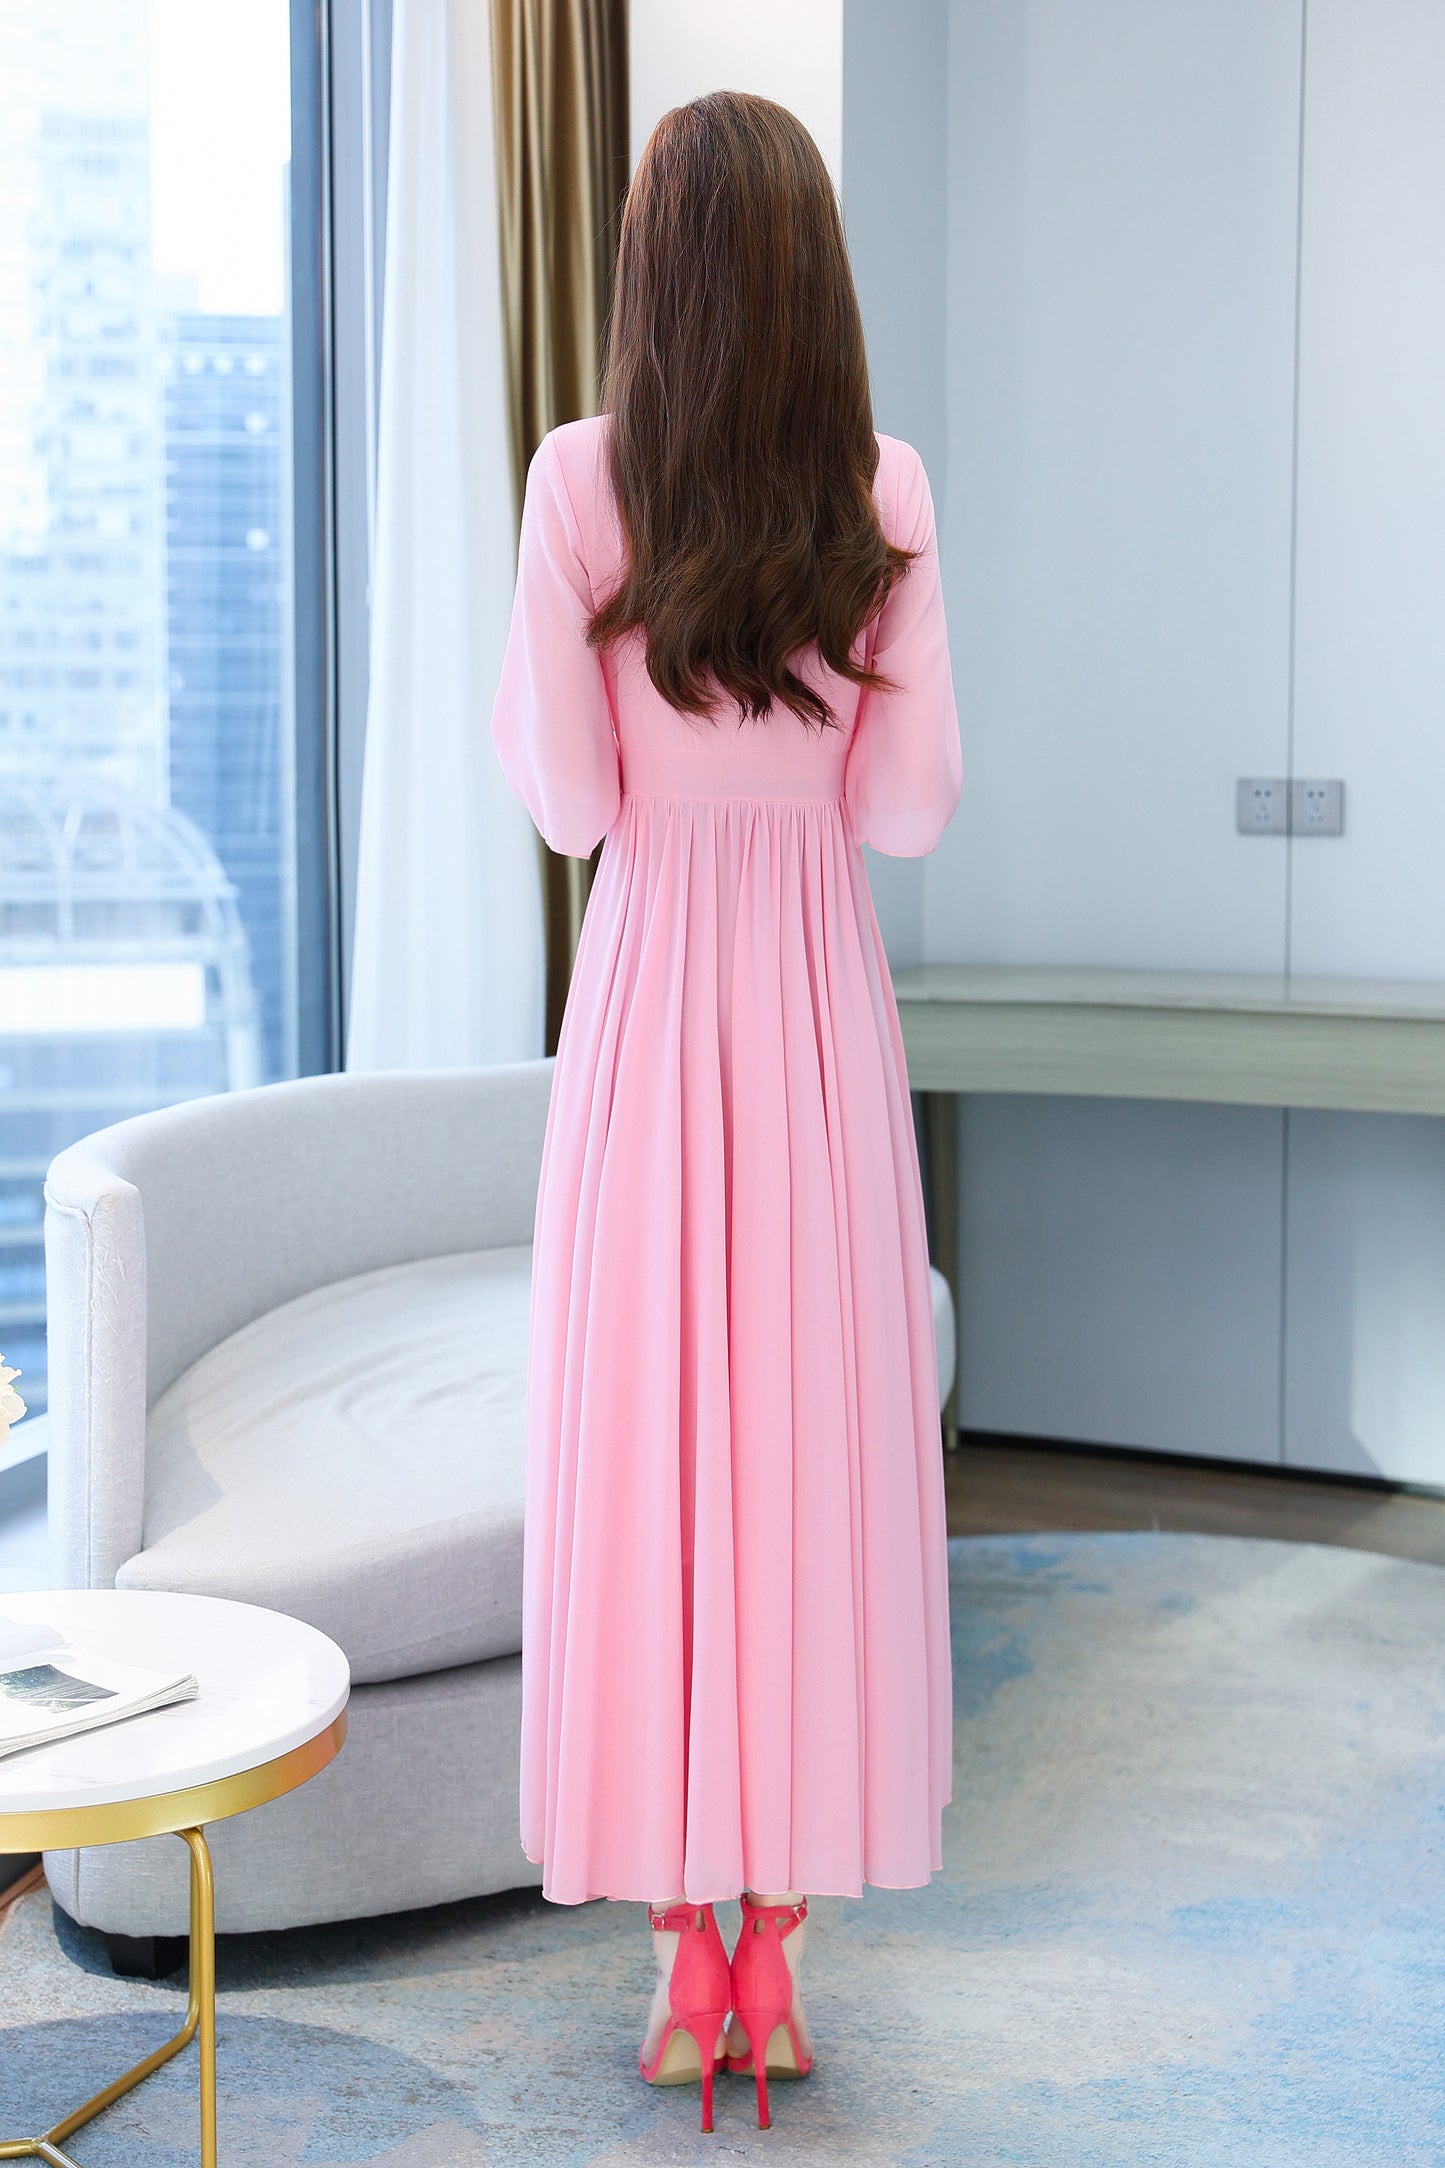 Classic Solid Color V-Neck with Bow Tie Elegant Maxi Dress